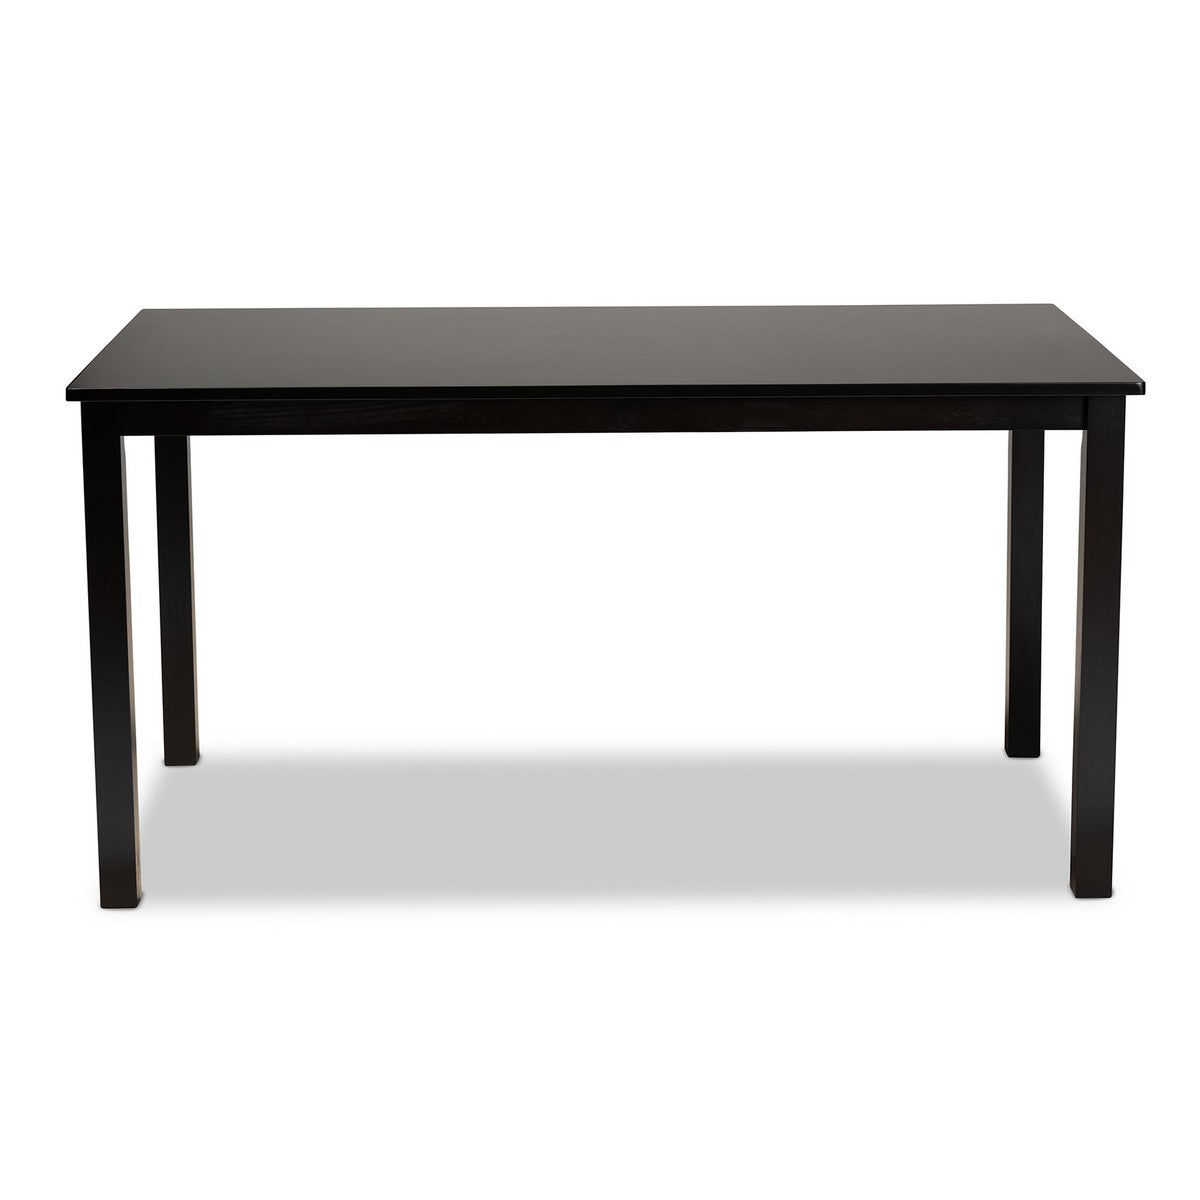 Baxton Studio Eveline Modern and Contemporary Espresso Brown Finished Rectangular Wood Dining Table